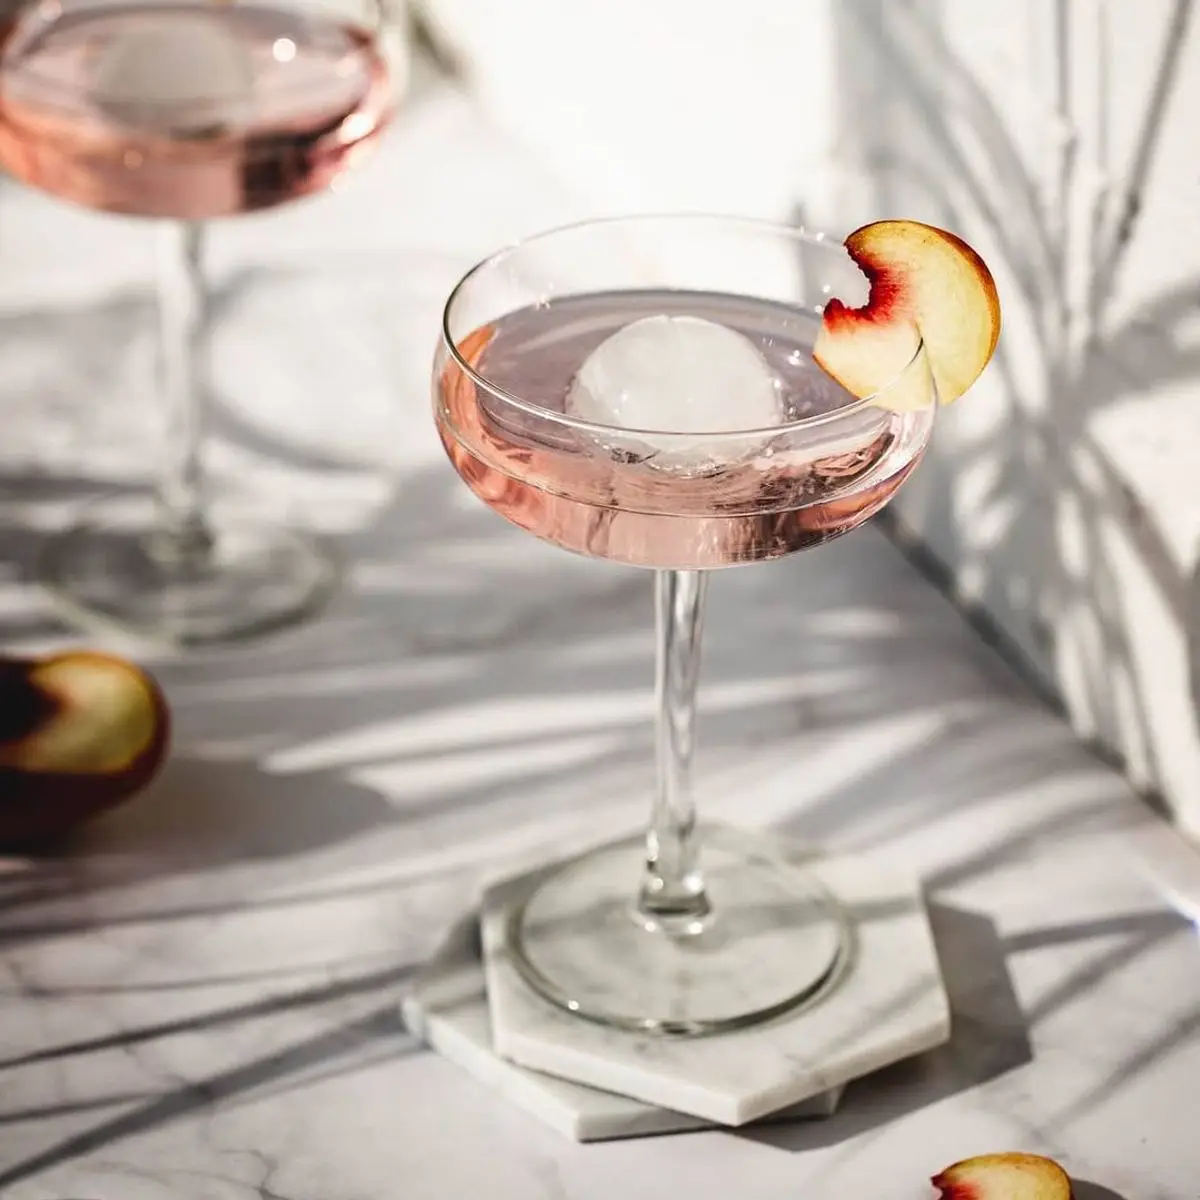 17 Items Thatll Help You Make Amazing Party Cocktails ...